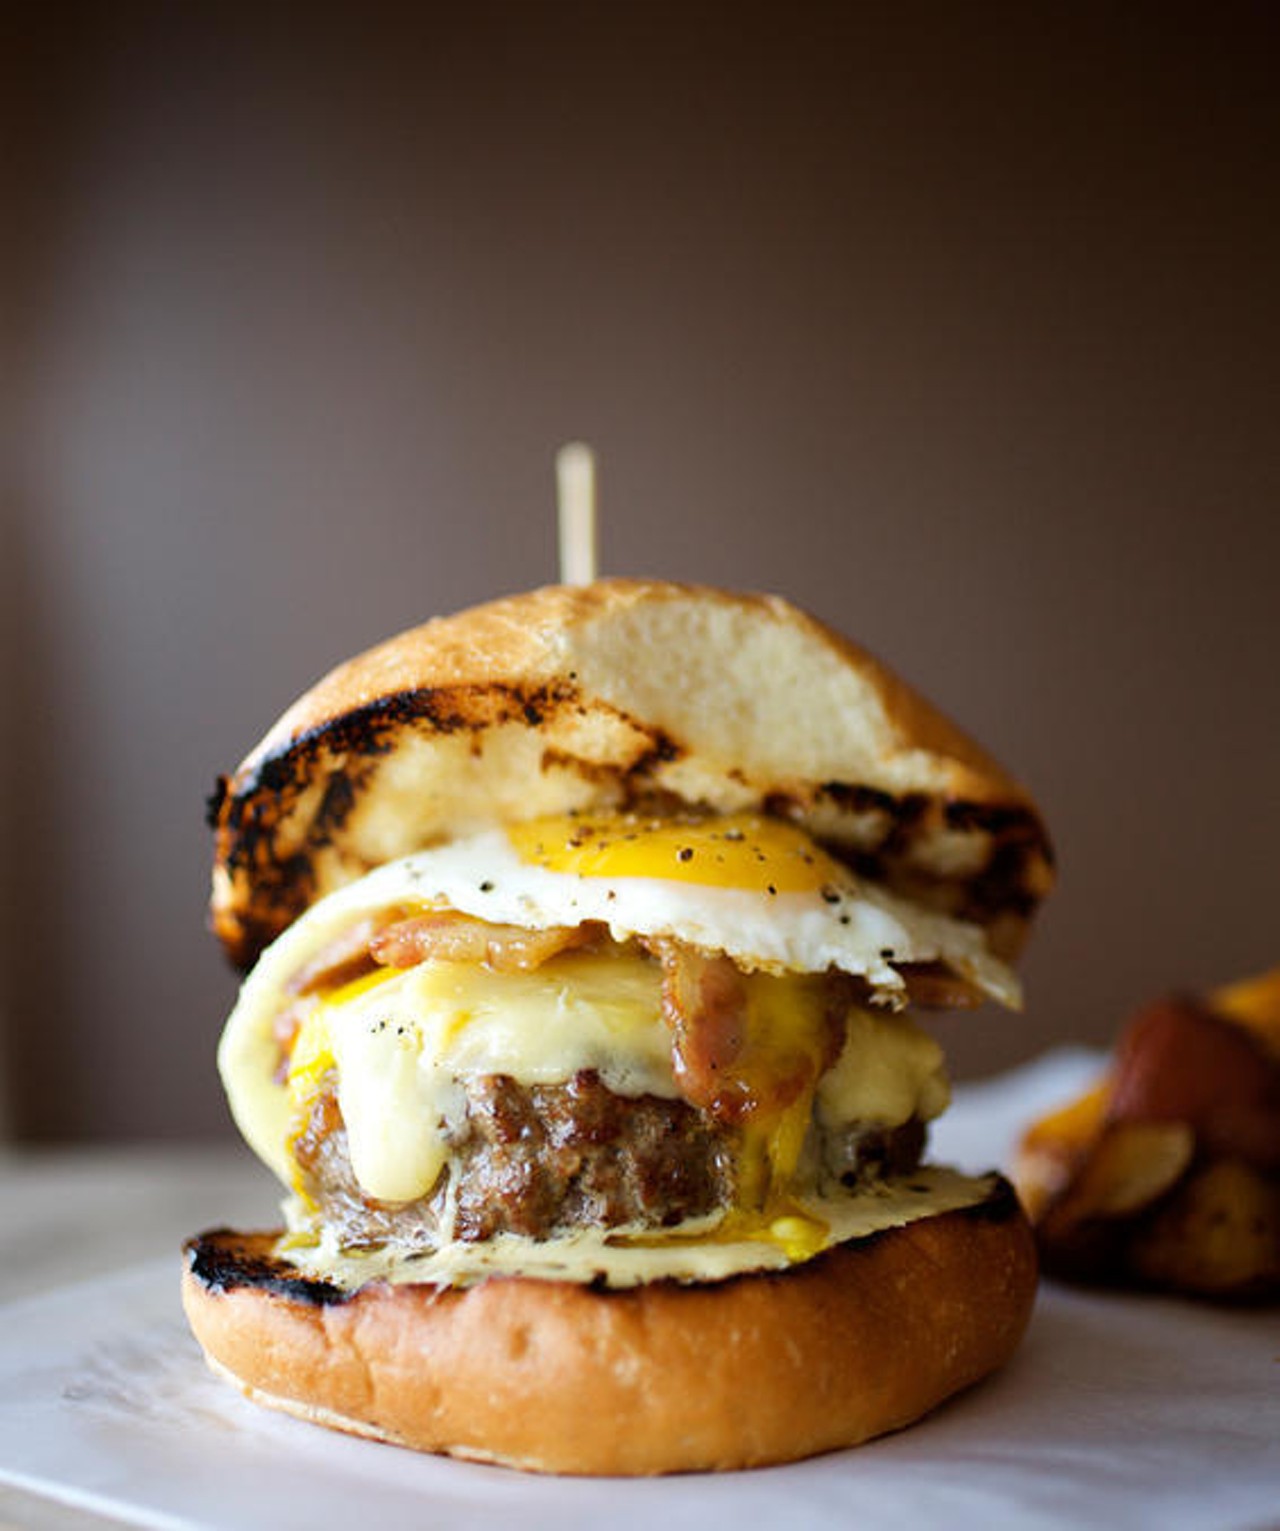 A mainstay on the lunch menu, the Cheeseburger, is Missouri grass fed beef, roasted garlic aioli, bacon, Iowa sharp cheddar and a fried egg served with roasted red potatoes.